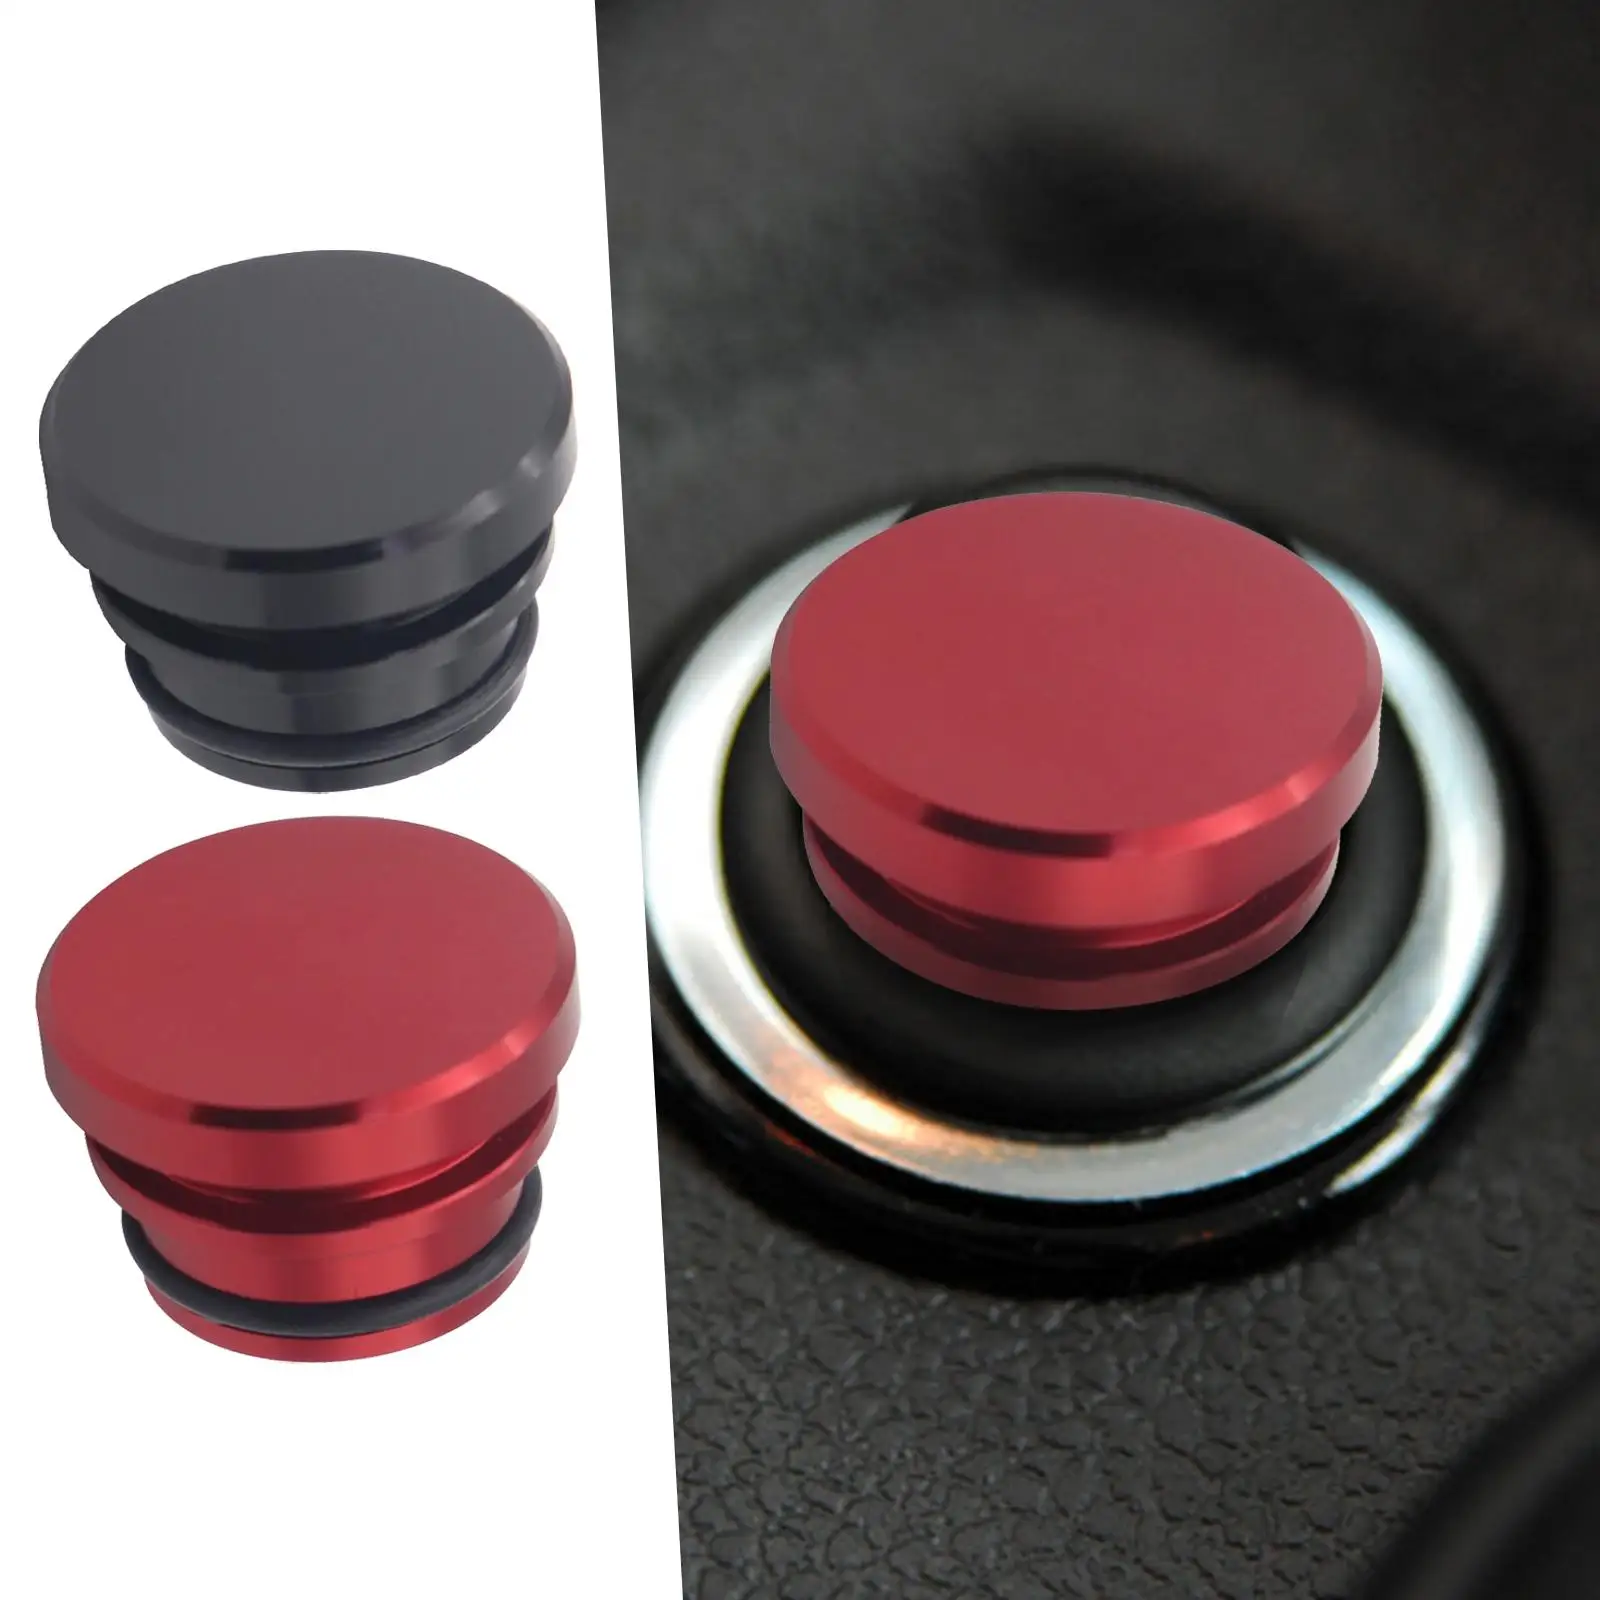 2 Pieces Cigarette Lighter Cover Cap Easy Installation Quality Dash Power Outlet Covers Car Accessories for Car Truck SUV